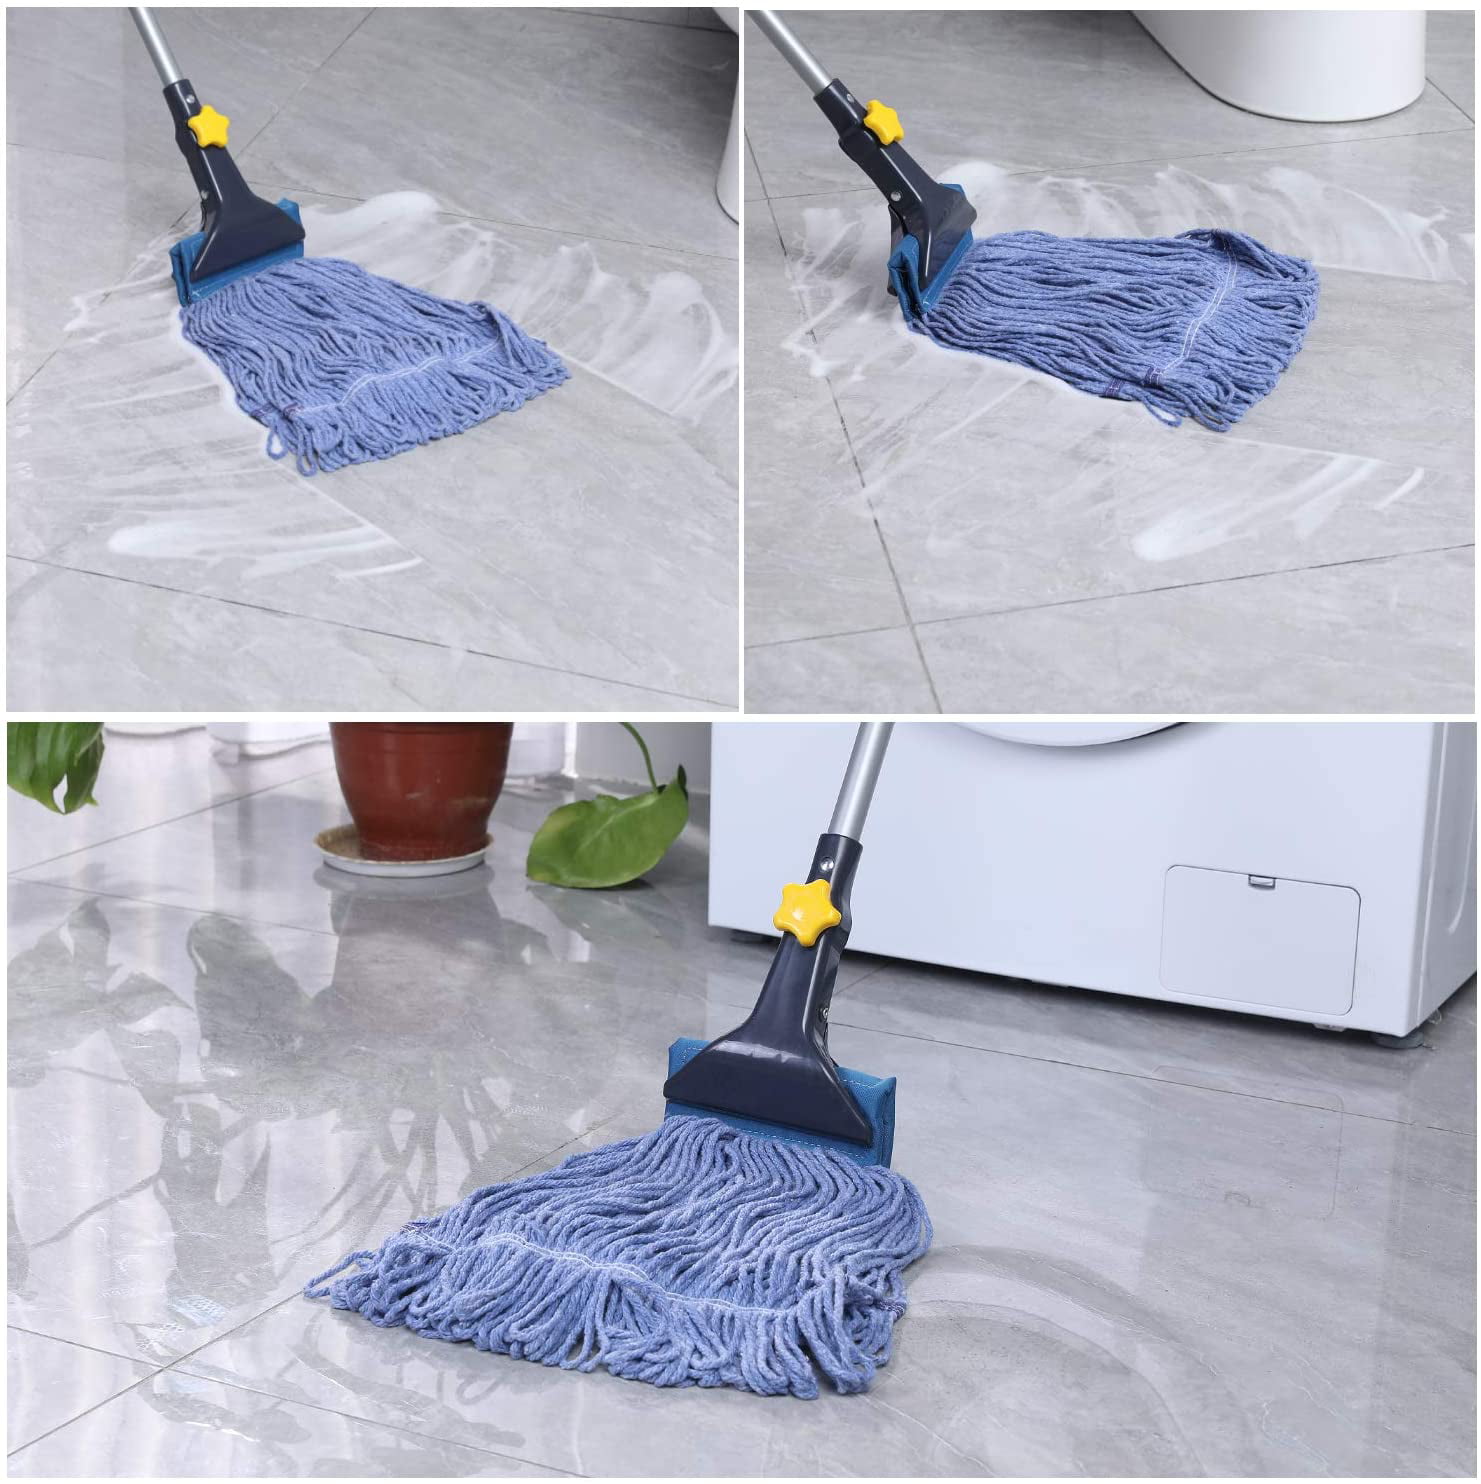 Garage Kitchen Hotel Floor Cleaning Industrial Heavy Duty Mop with 2Pcs Mop Pads Cotton Wet Looped-End String Mop with 51.6 Stainless Steel Handle for Home Commercial Mop Office 